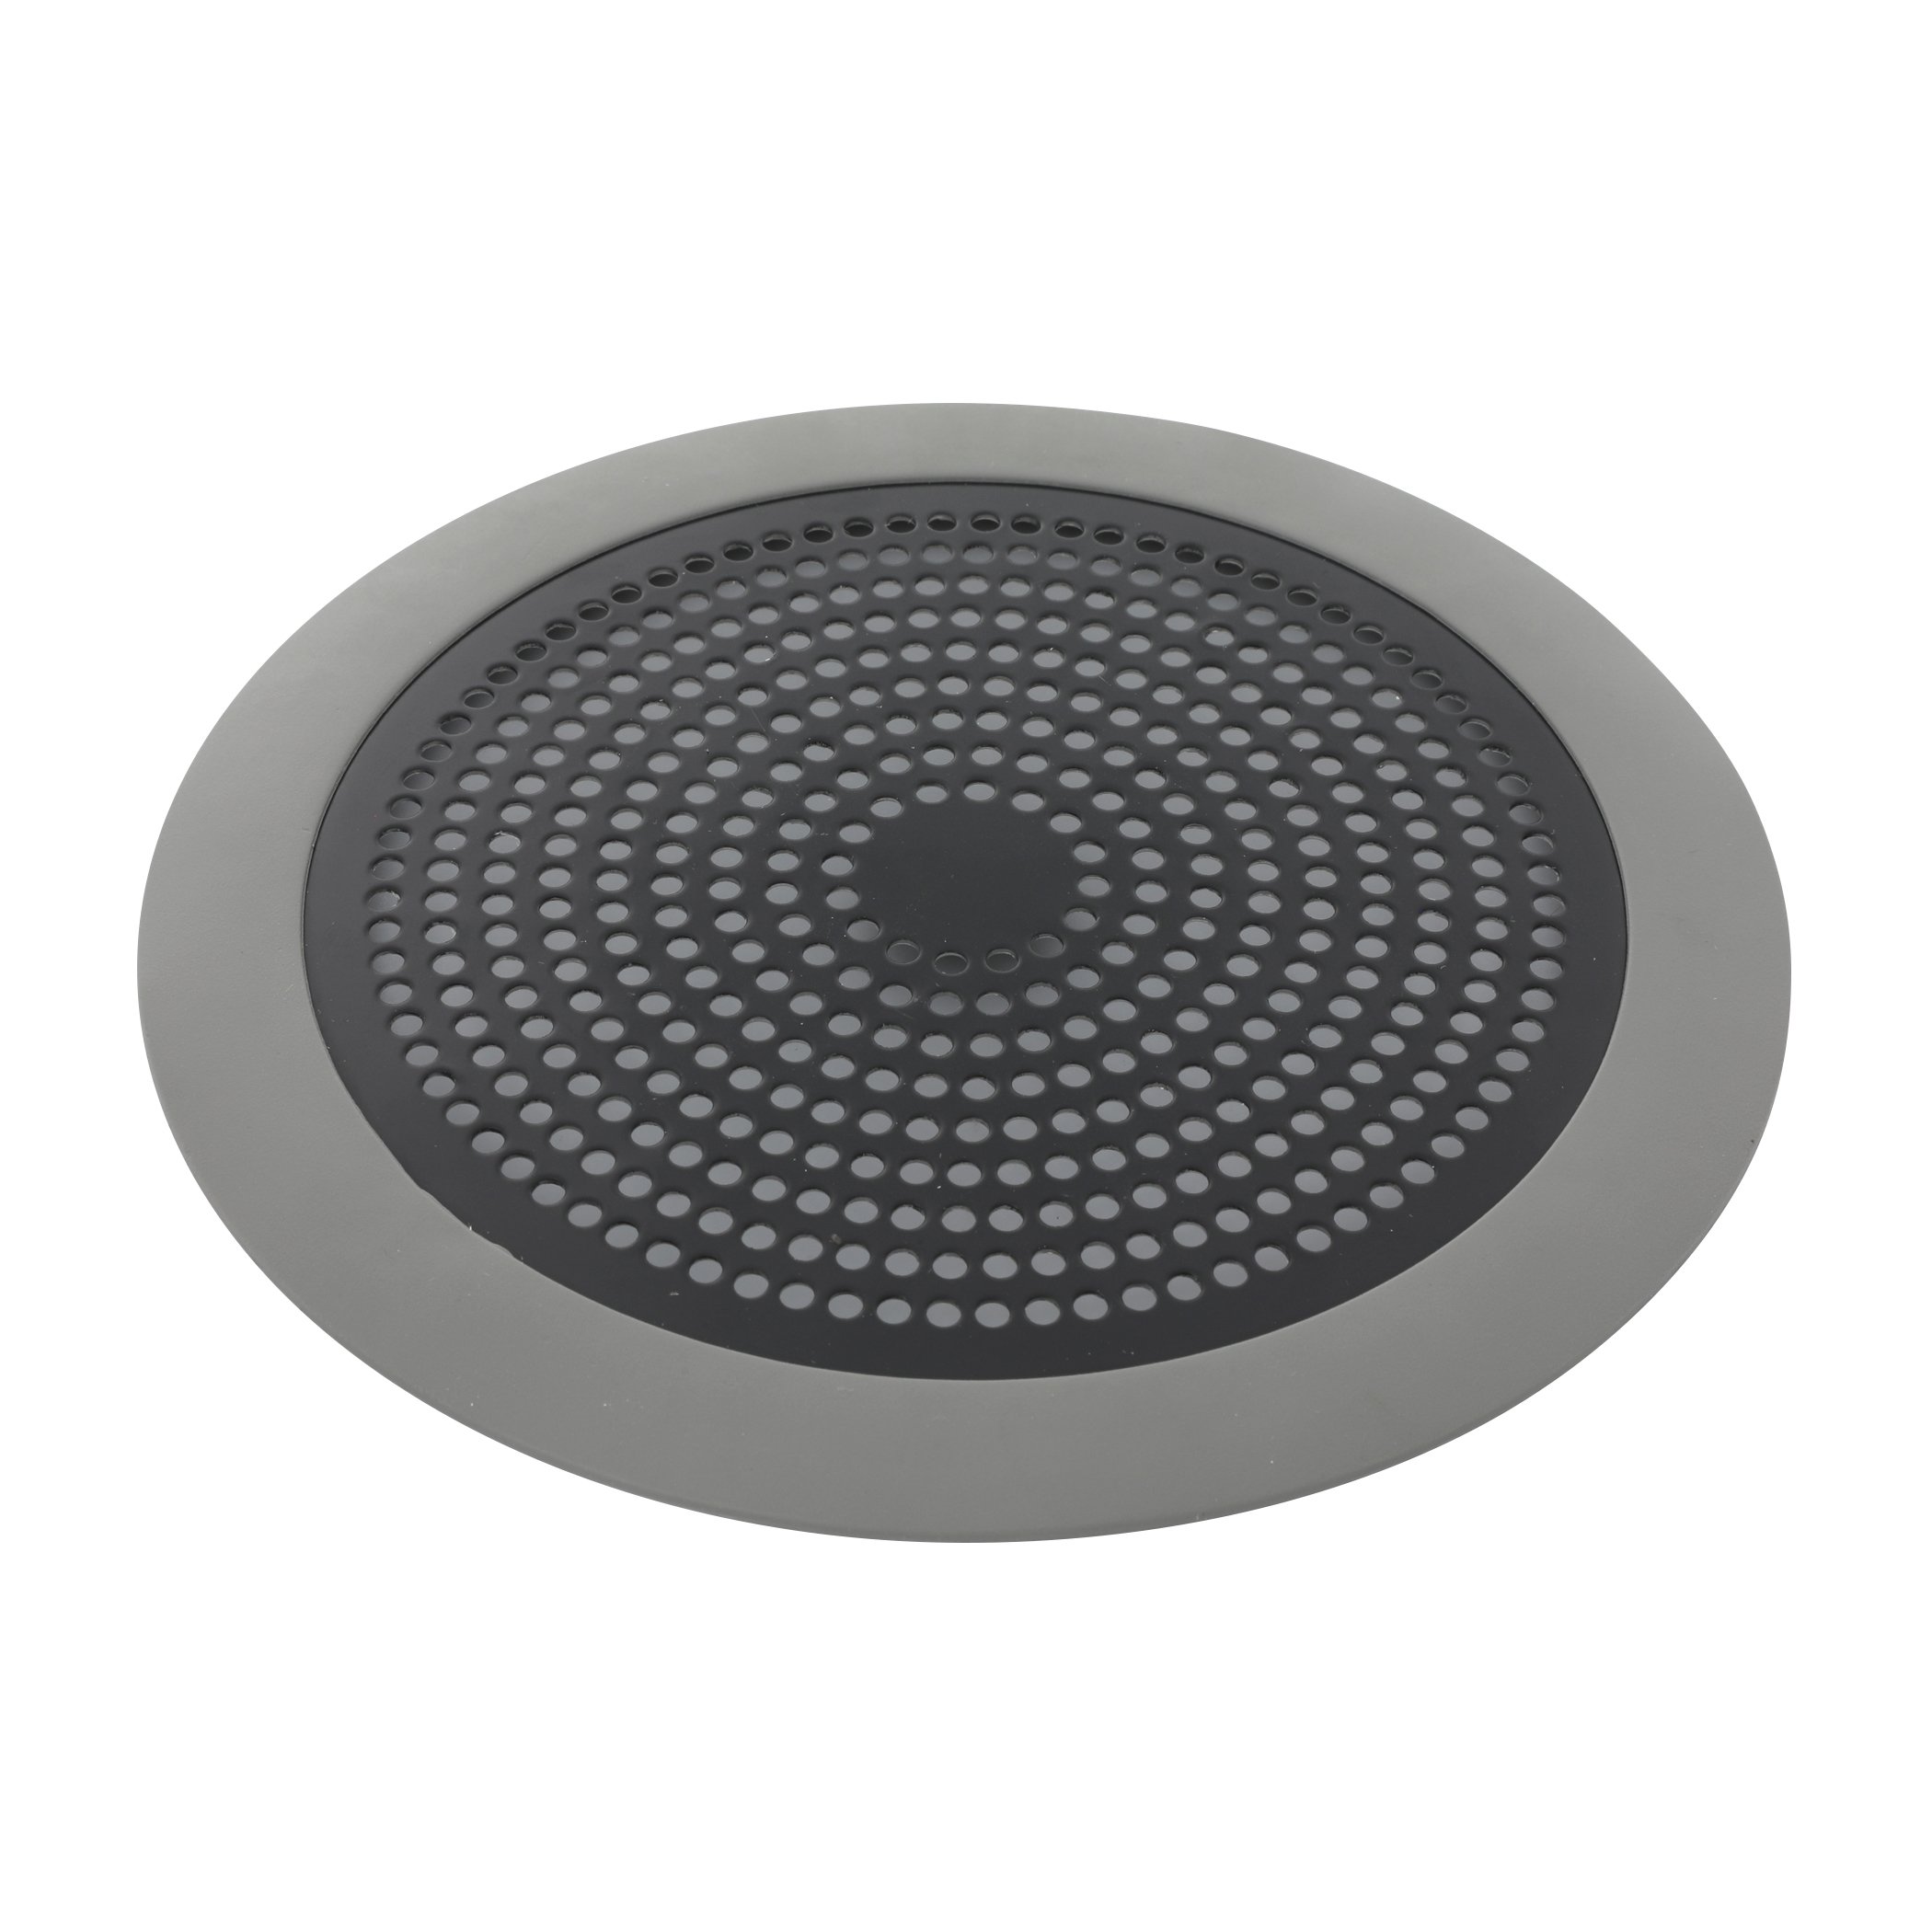 DANCO 3 in. Square Hair Catcher Strainer for Shower Drain in Matte Black  11087 - The Home Depot